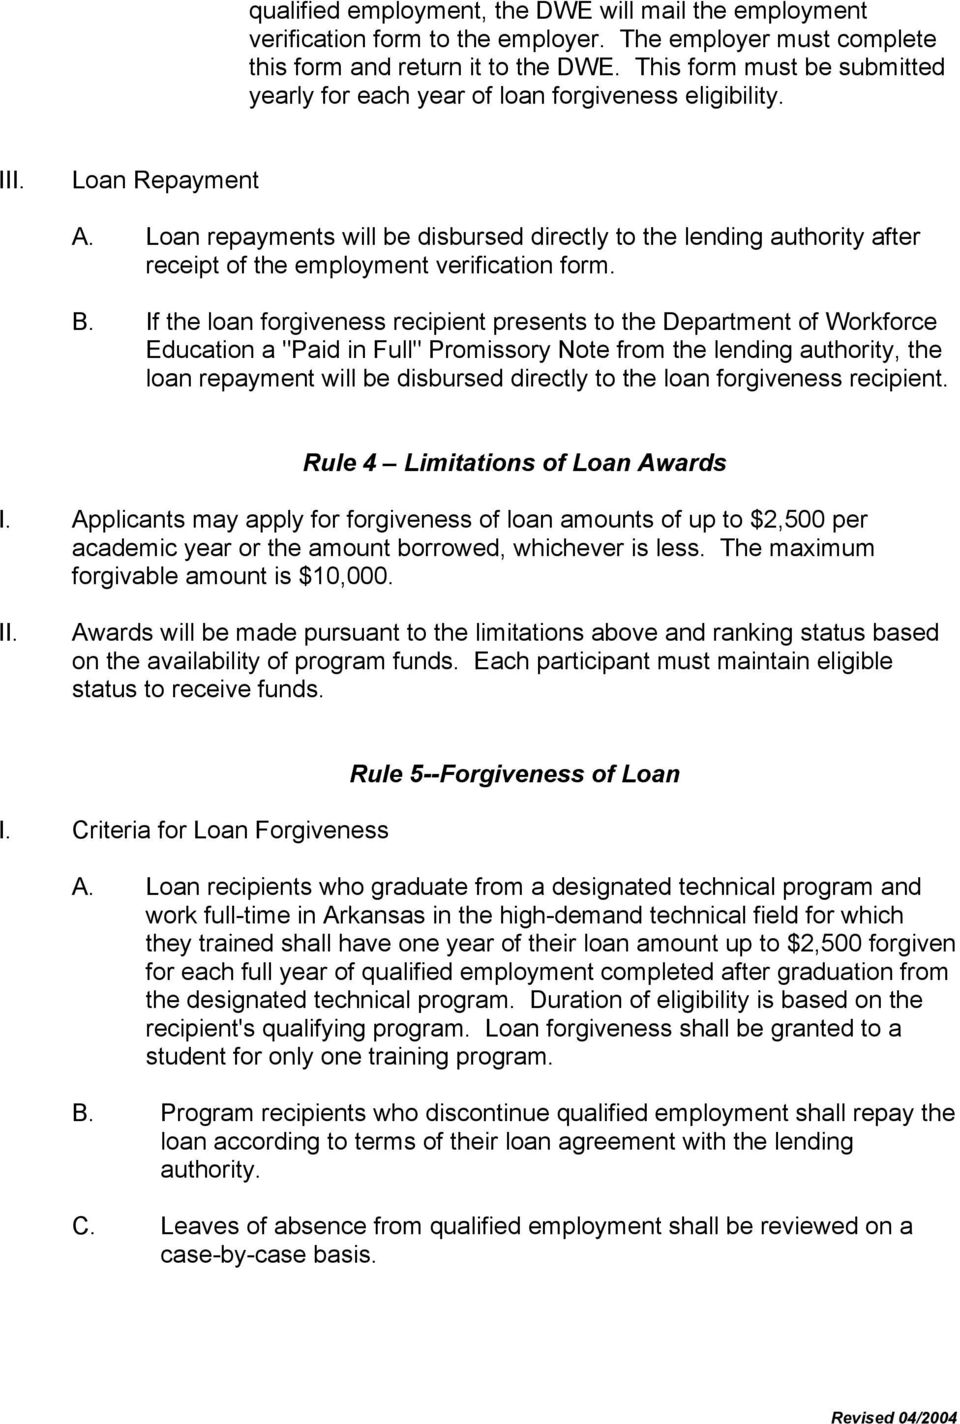 Loan repayments will be disbursed directly to the lending authority after receipt of the employment verification form. B.